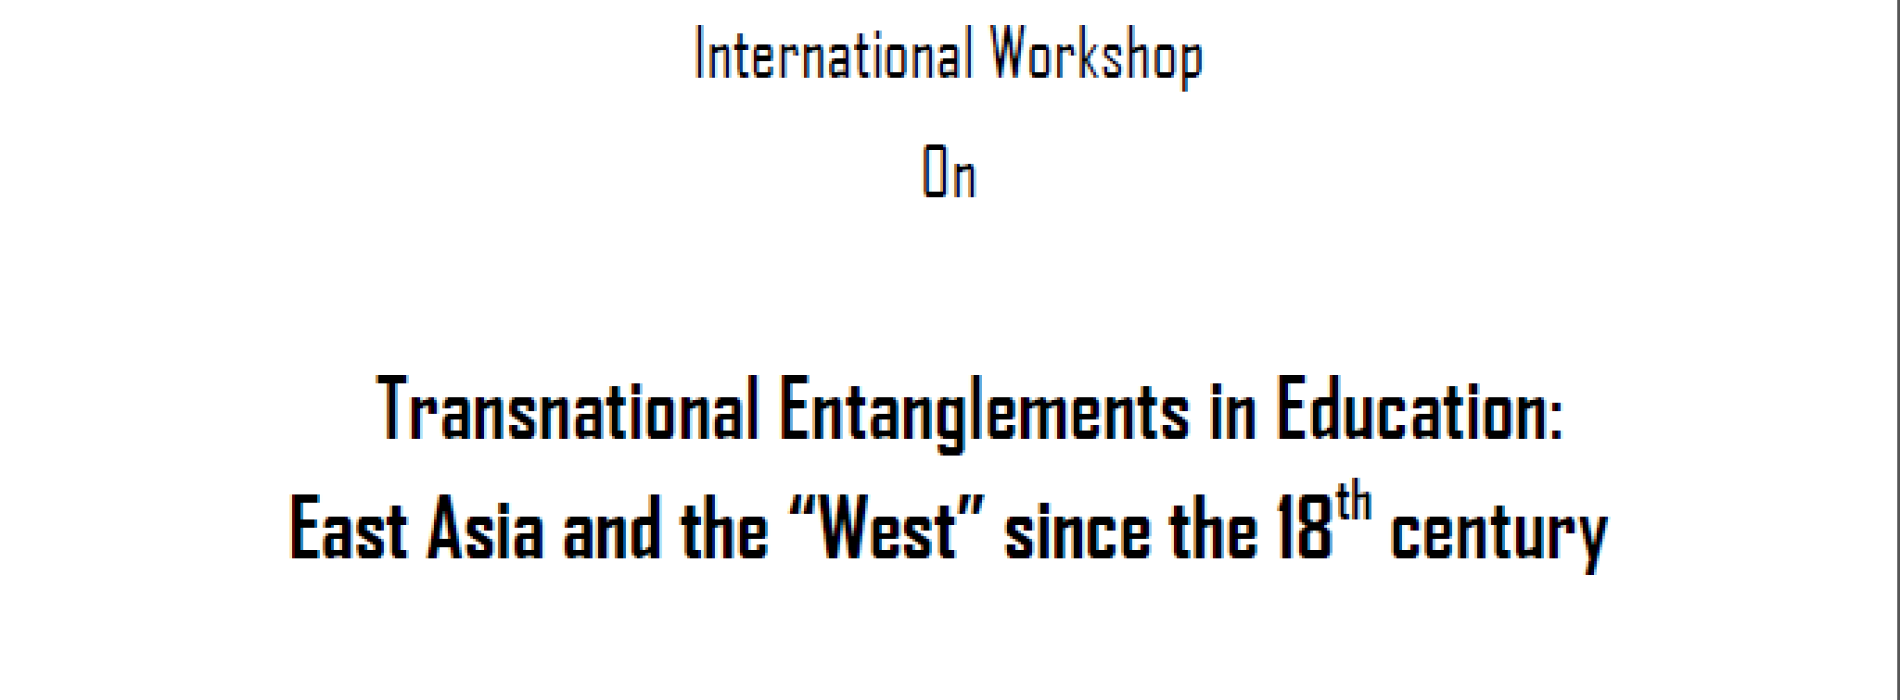 Final Program Posted for ISCHE East Asia Regional Workshop 20-21 August 2015 (Beijing, China)